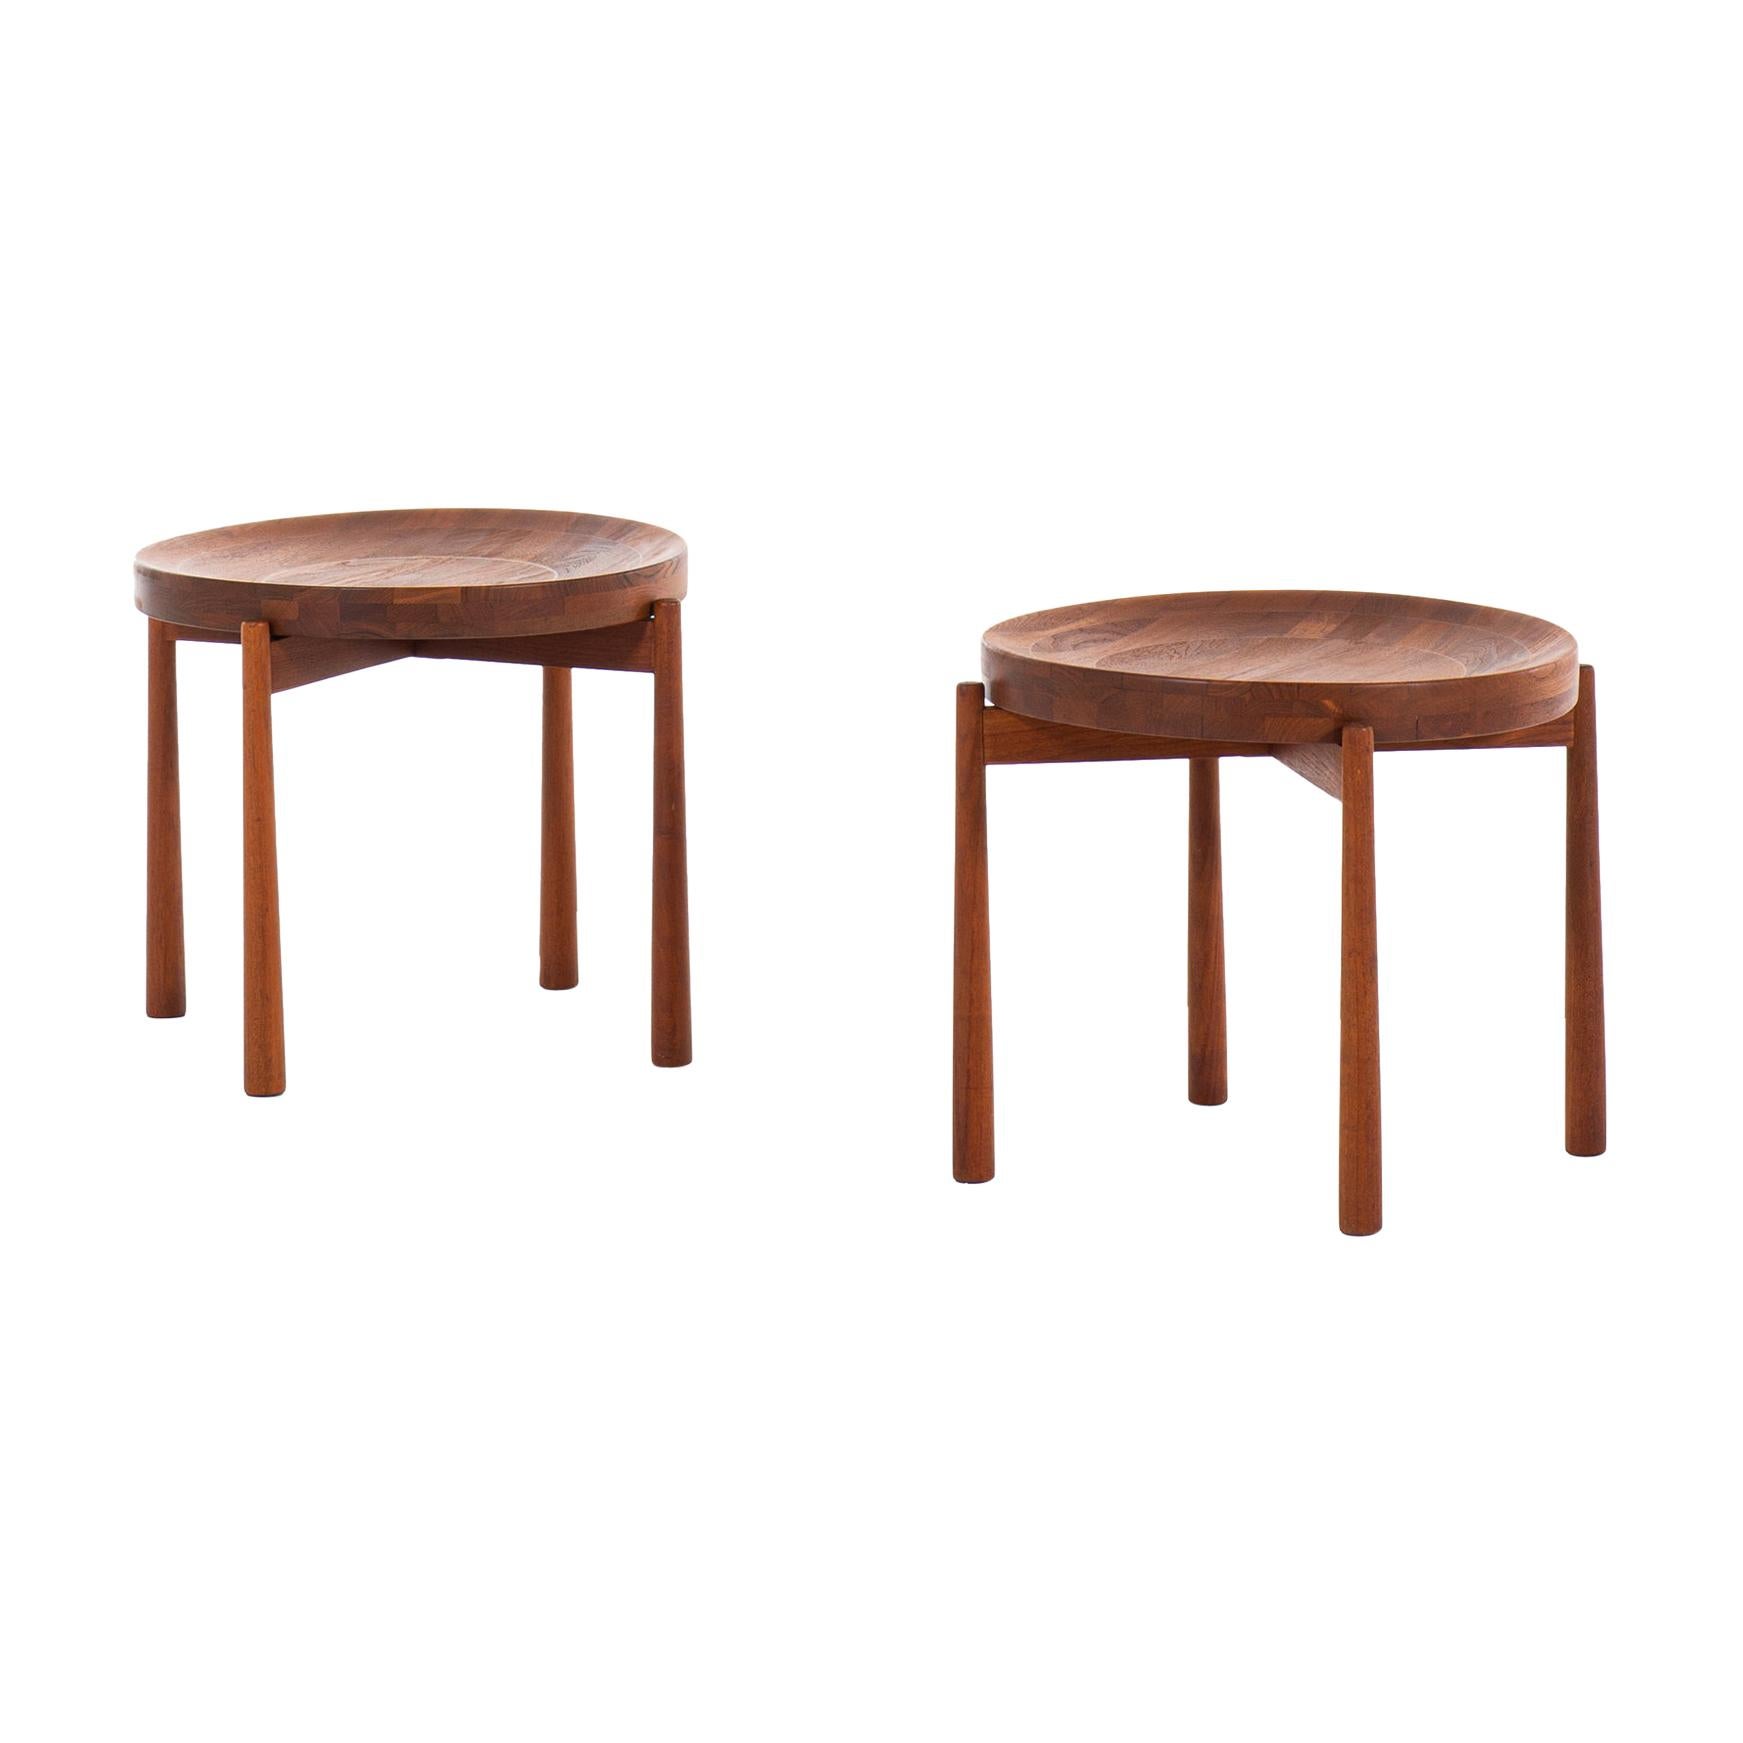 Jens Harald Quistgaard Attributed Side Tables Produced by Nissen in Denmark